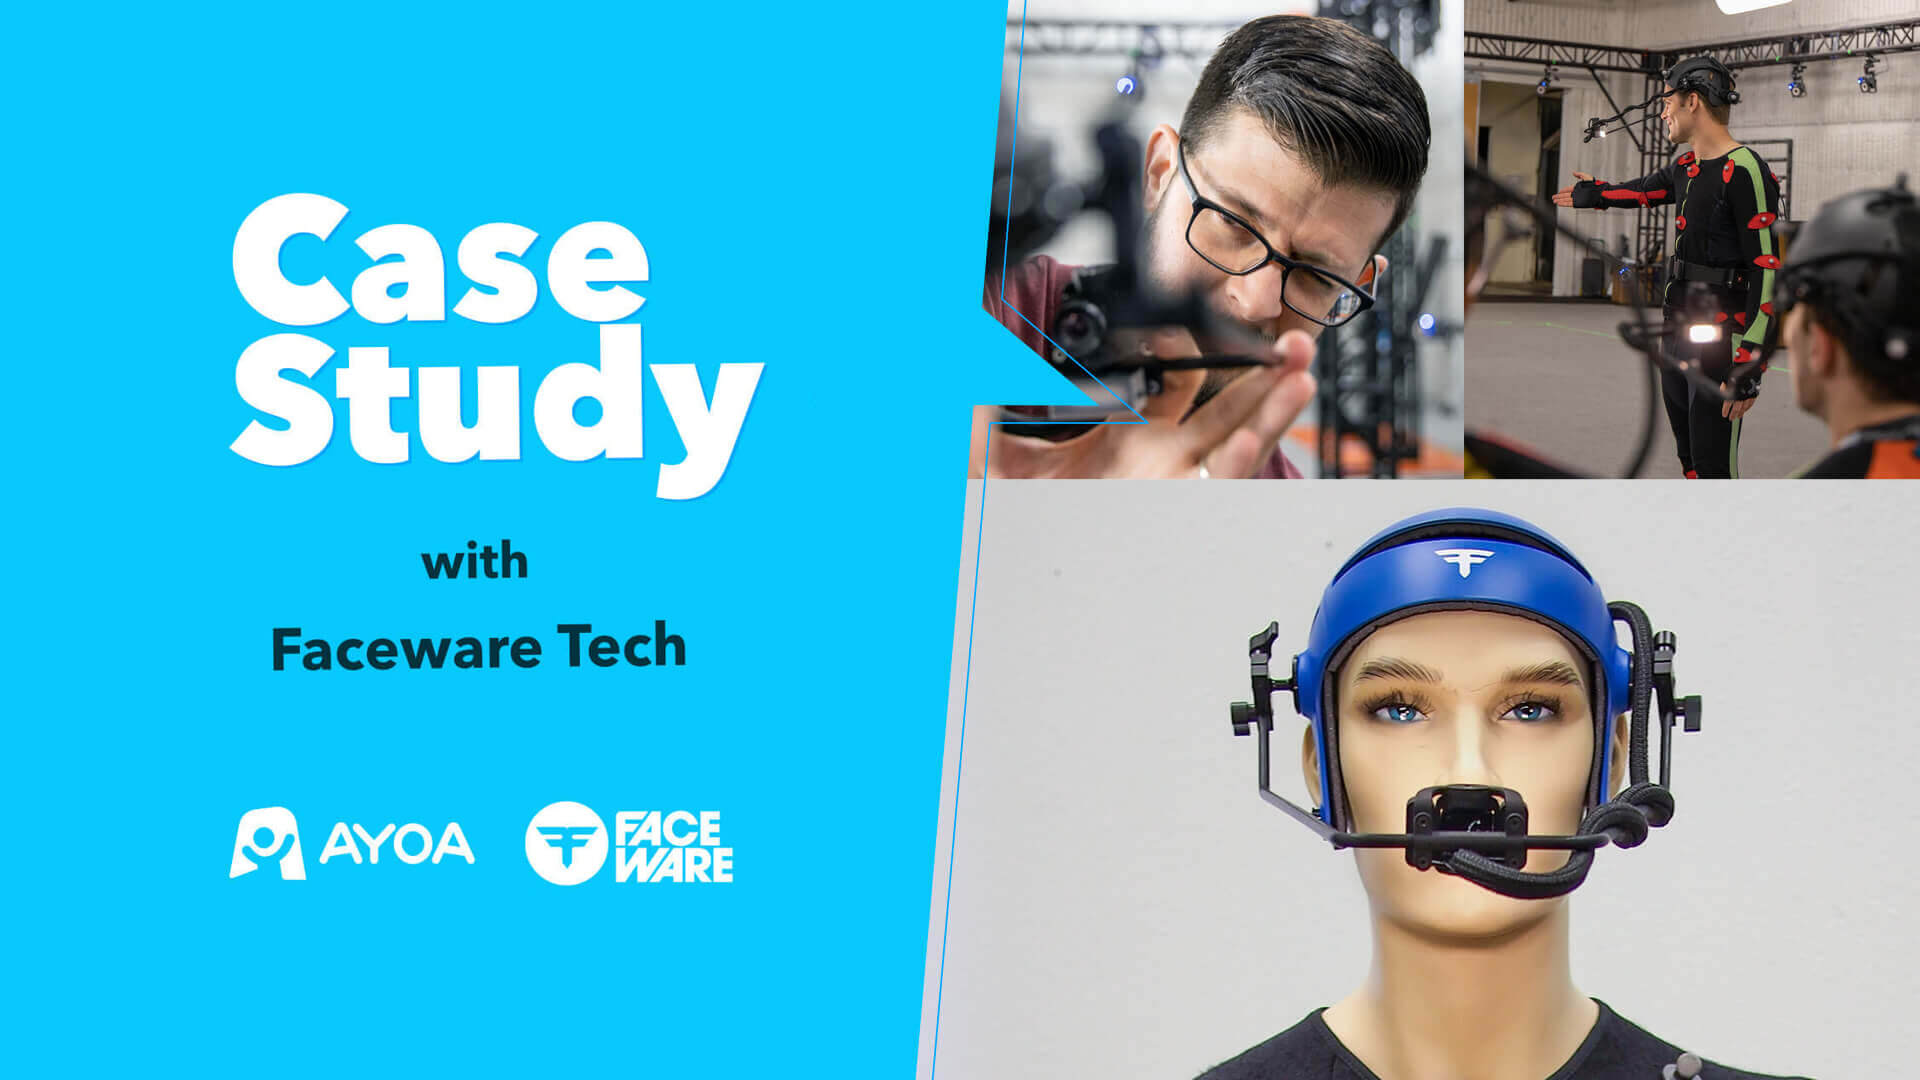 Ayoa | “It allows us to capture our wildest thoughts” – Case study with Faceware Tech